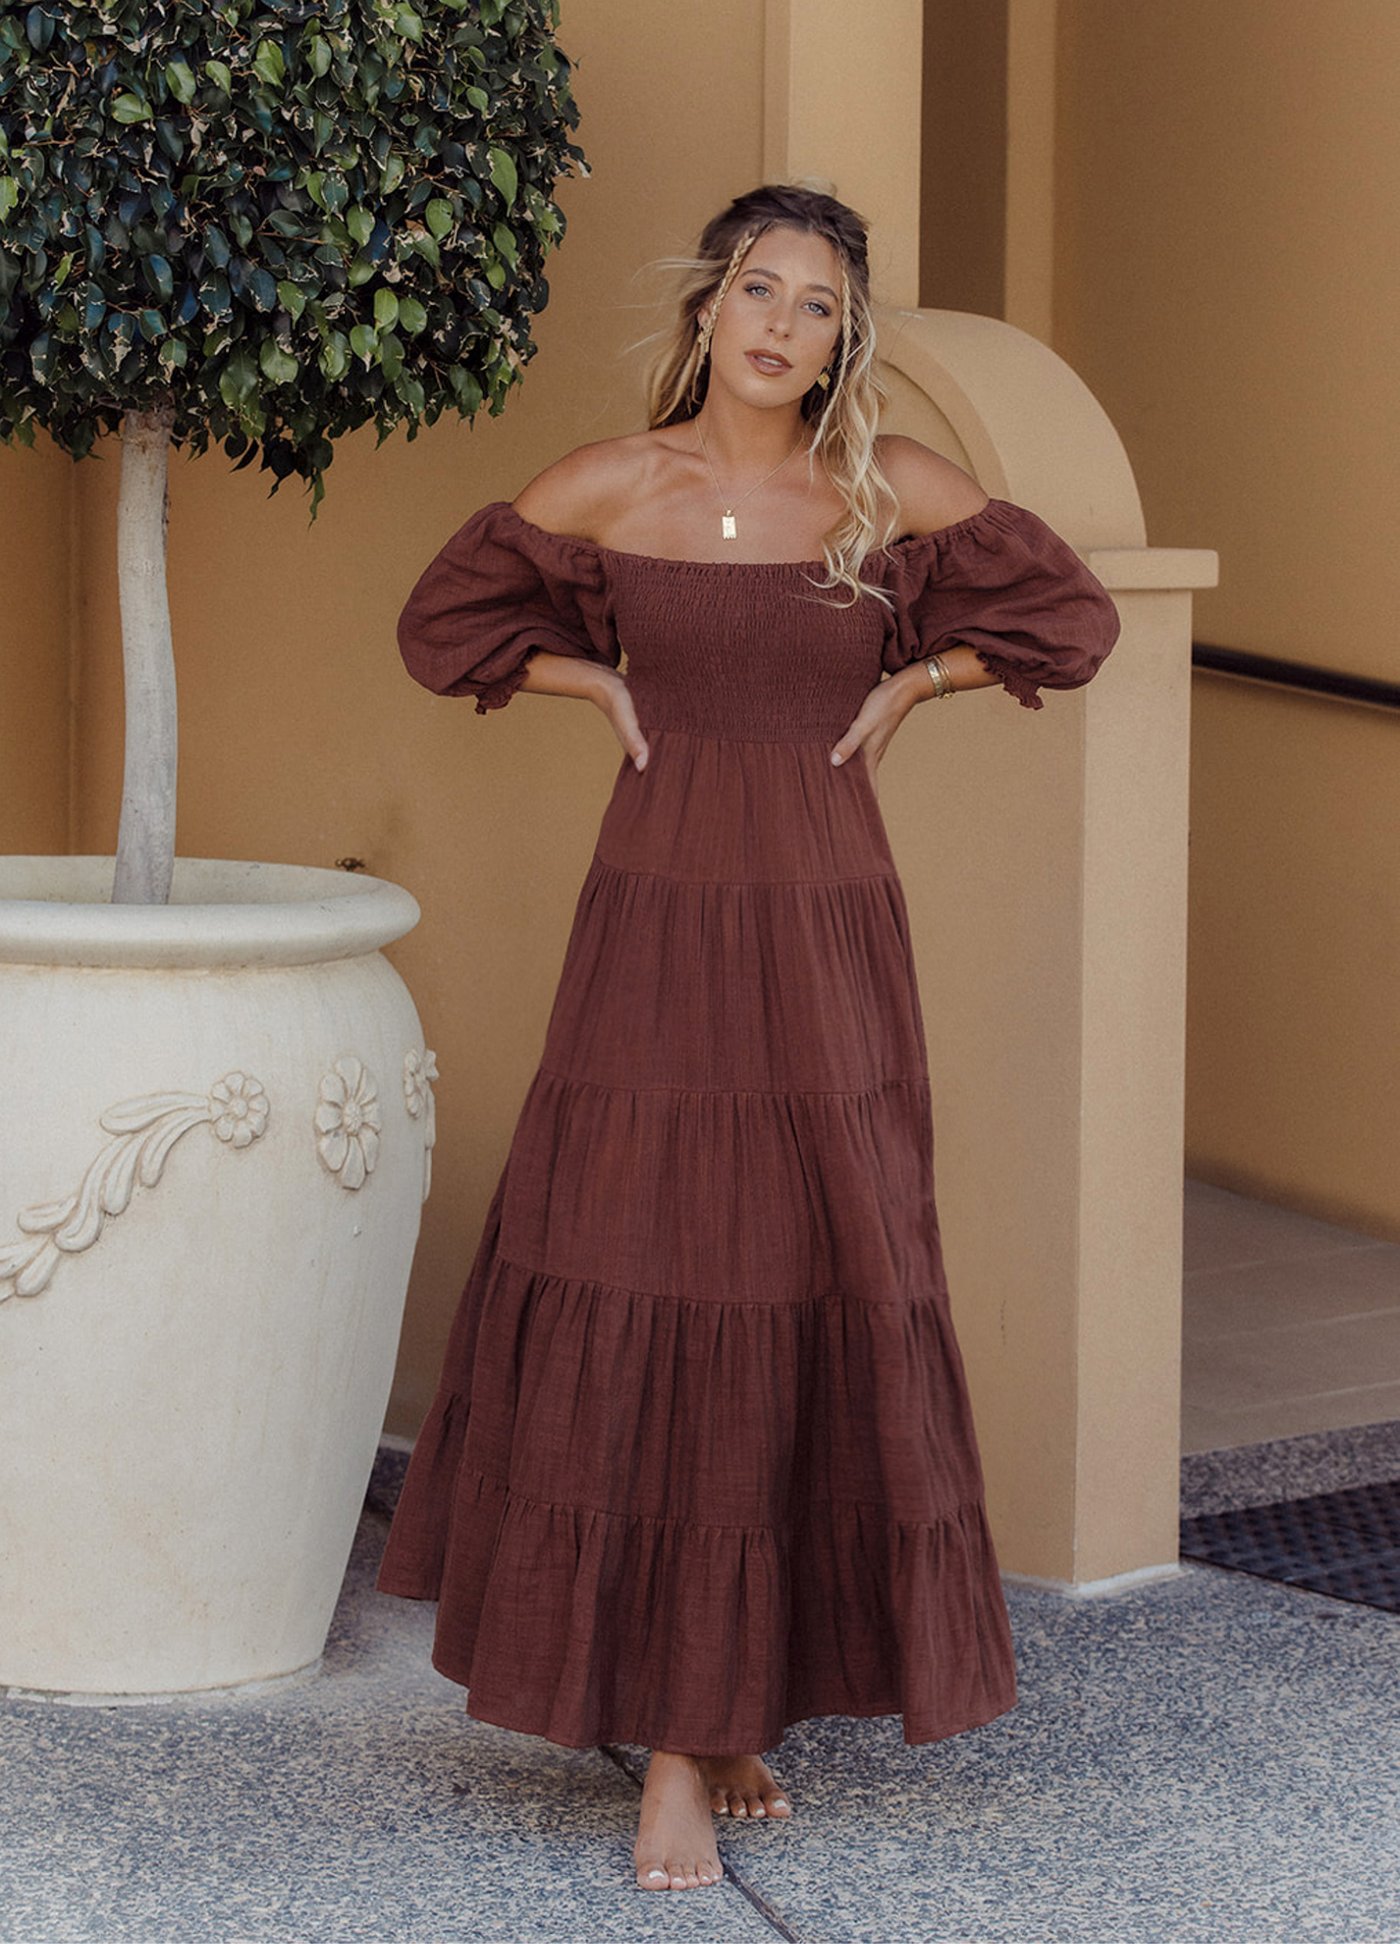 Model wearing chocolate brown tiered dress with short puffy sleeves